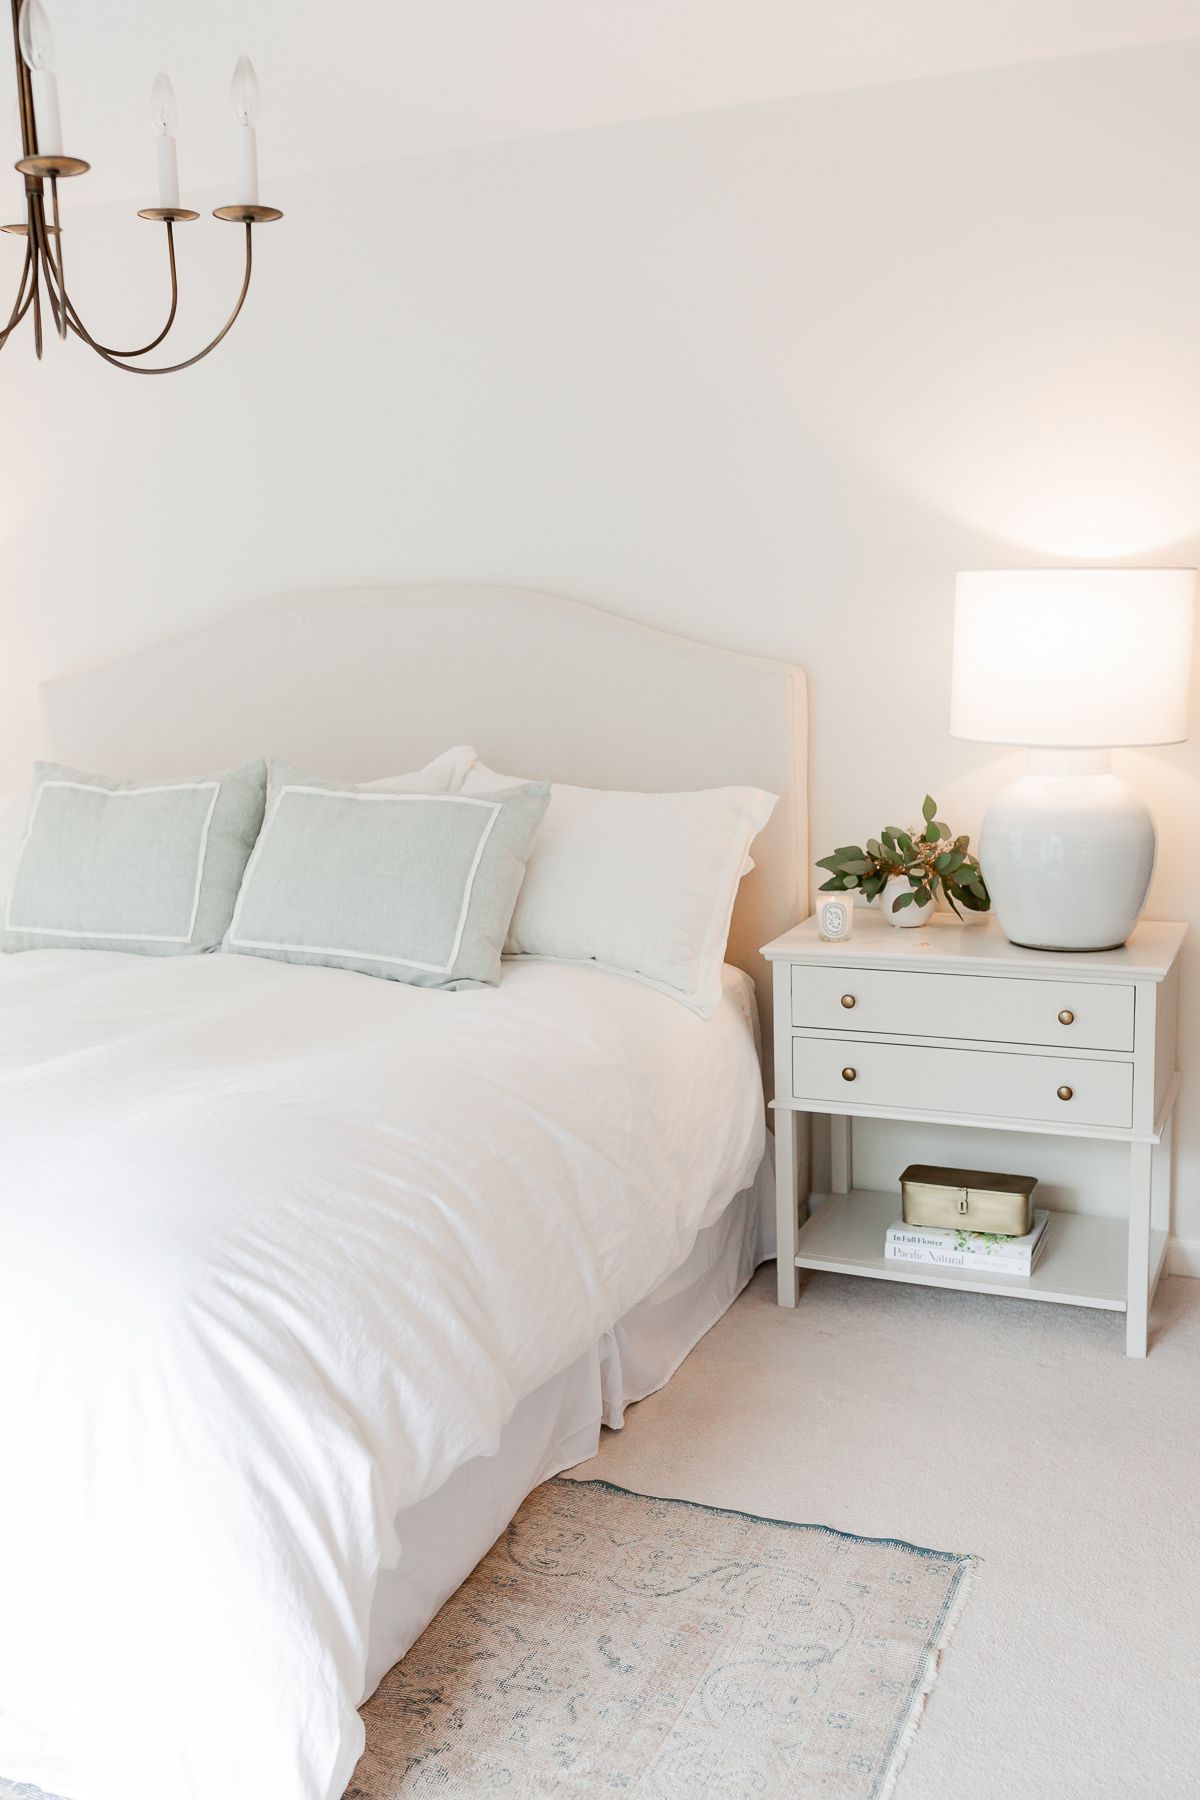 A cream colored bedroom with an upholstered bed